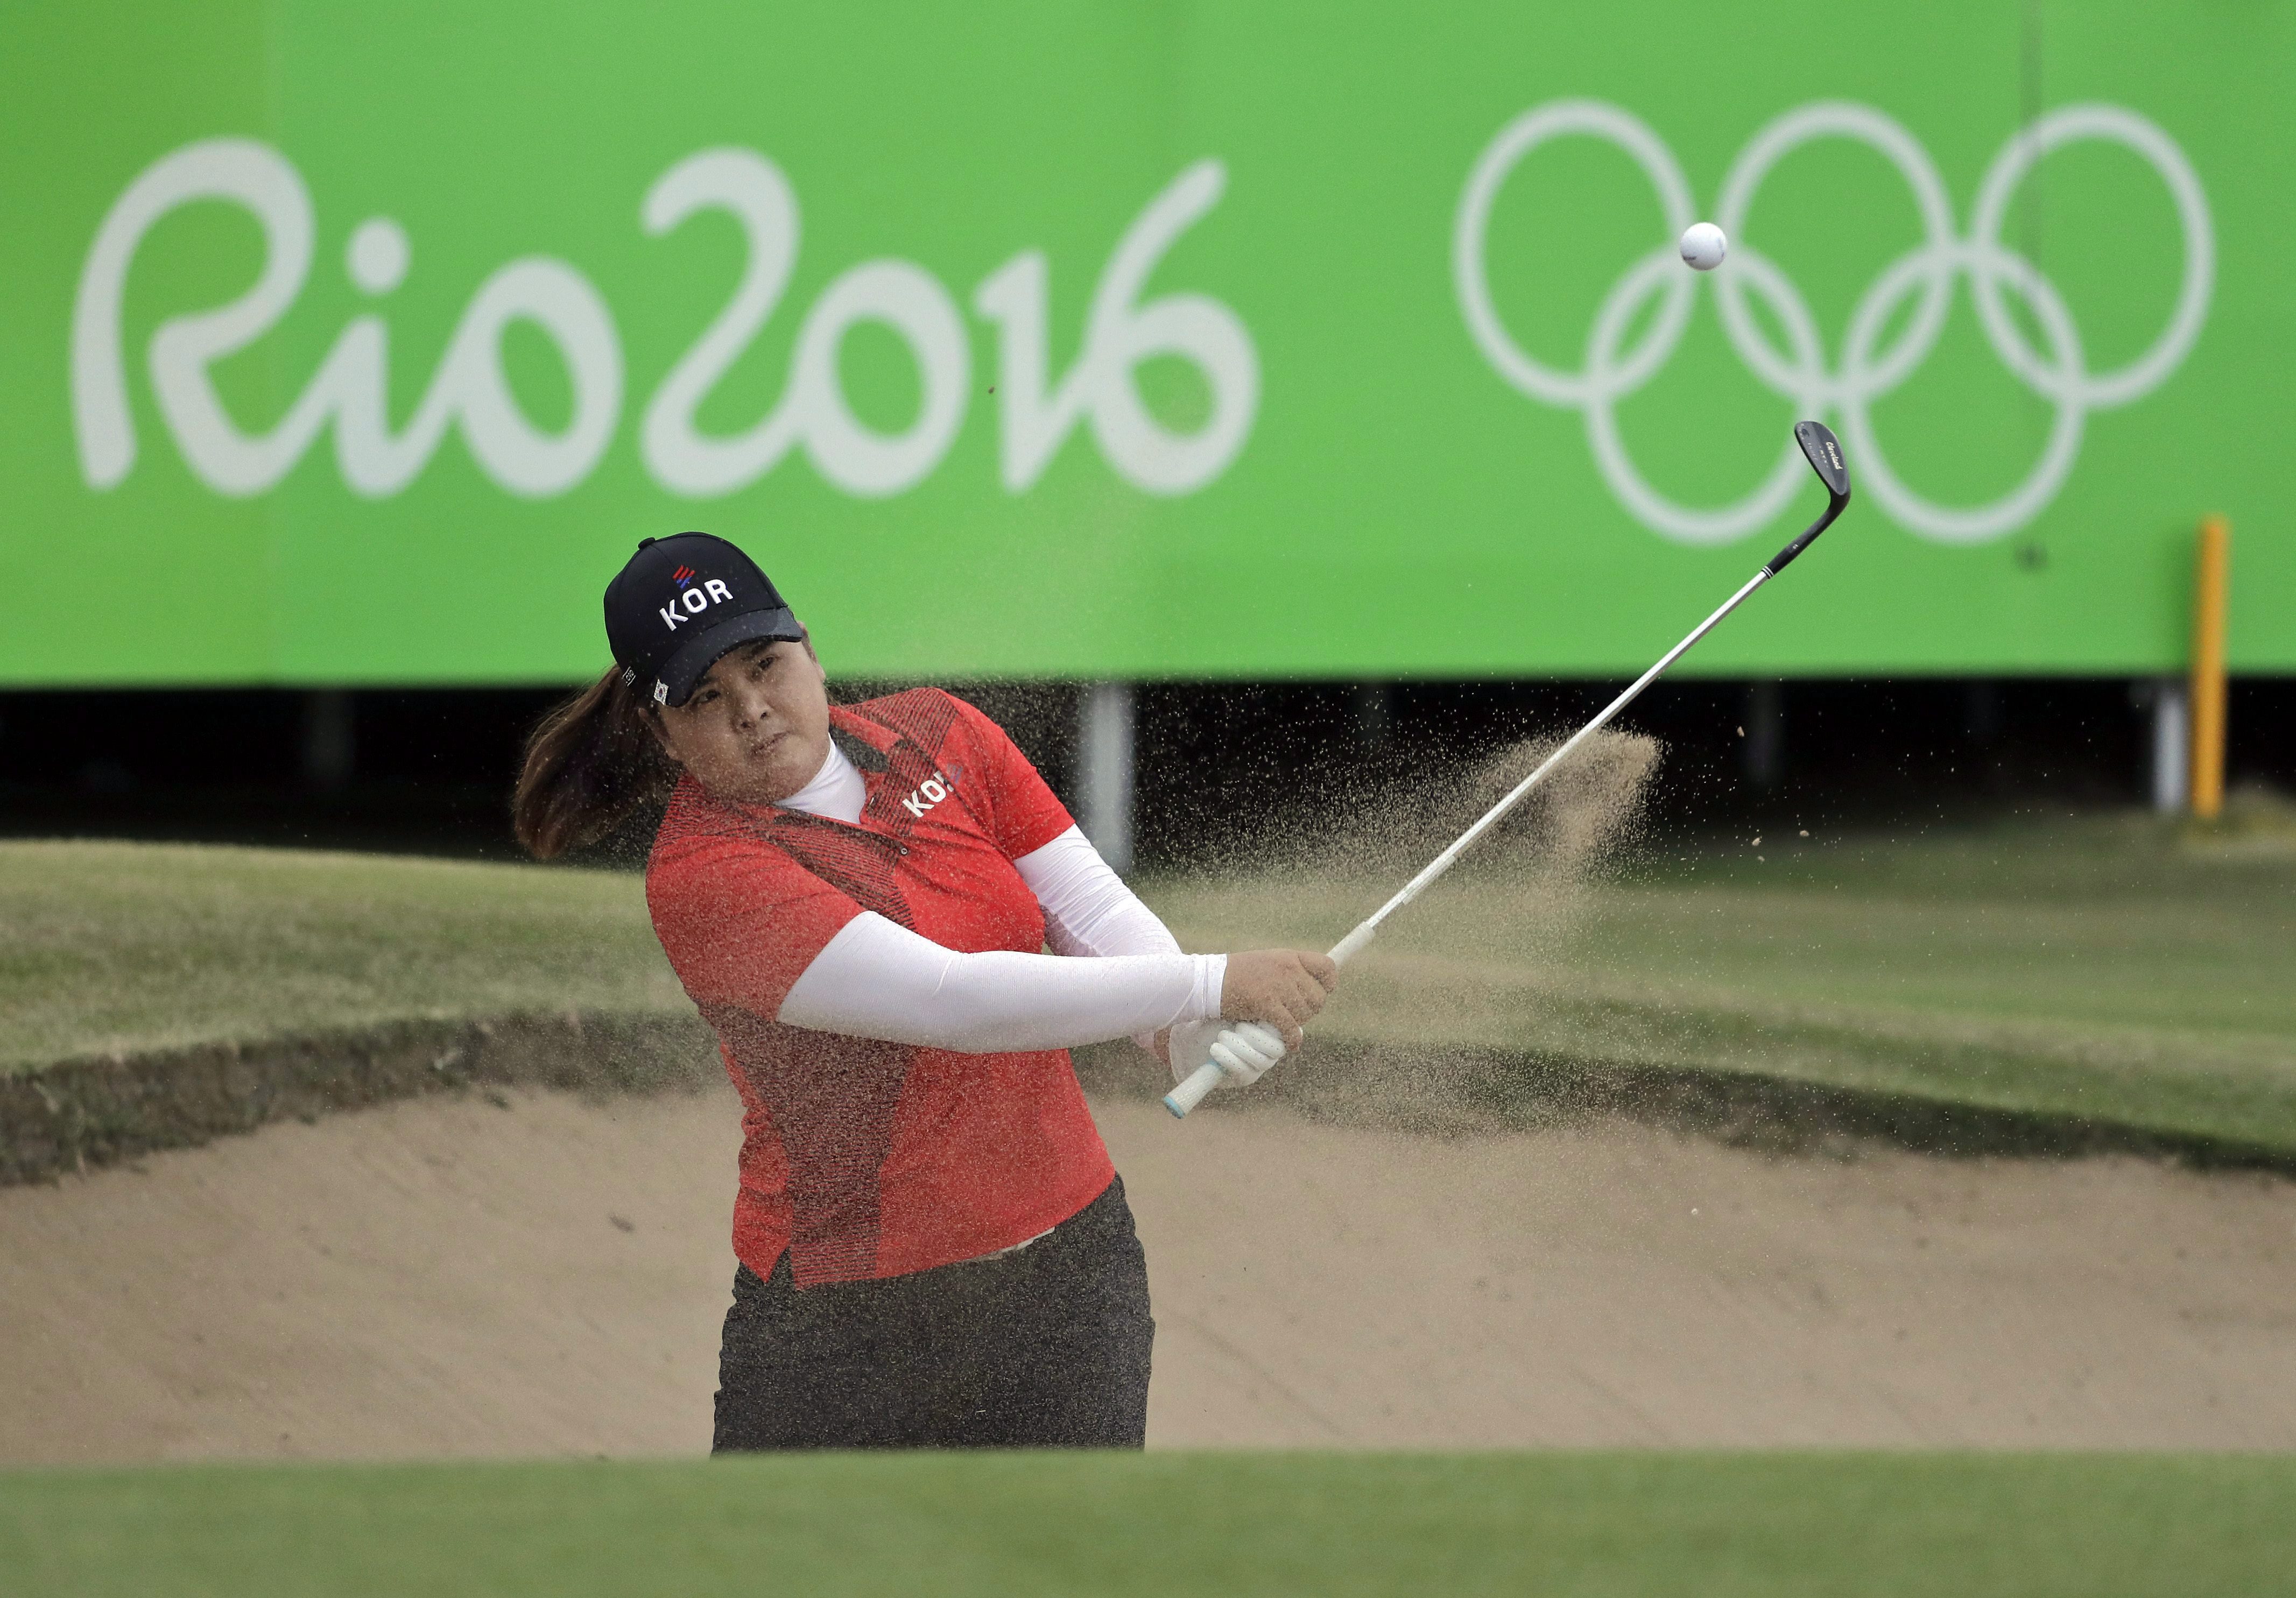 Inbee Park of South Korea, hits from the bunker on the 18th hole during the final round of the women's golf event at the 2016 Summer Olympics in Rio de Janeiro, Brazil, Saturday, Aug. 20, 2016. Park won the gold medal. (AP Photo/Chris Carlson)